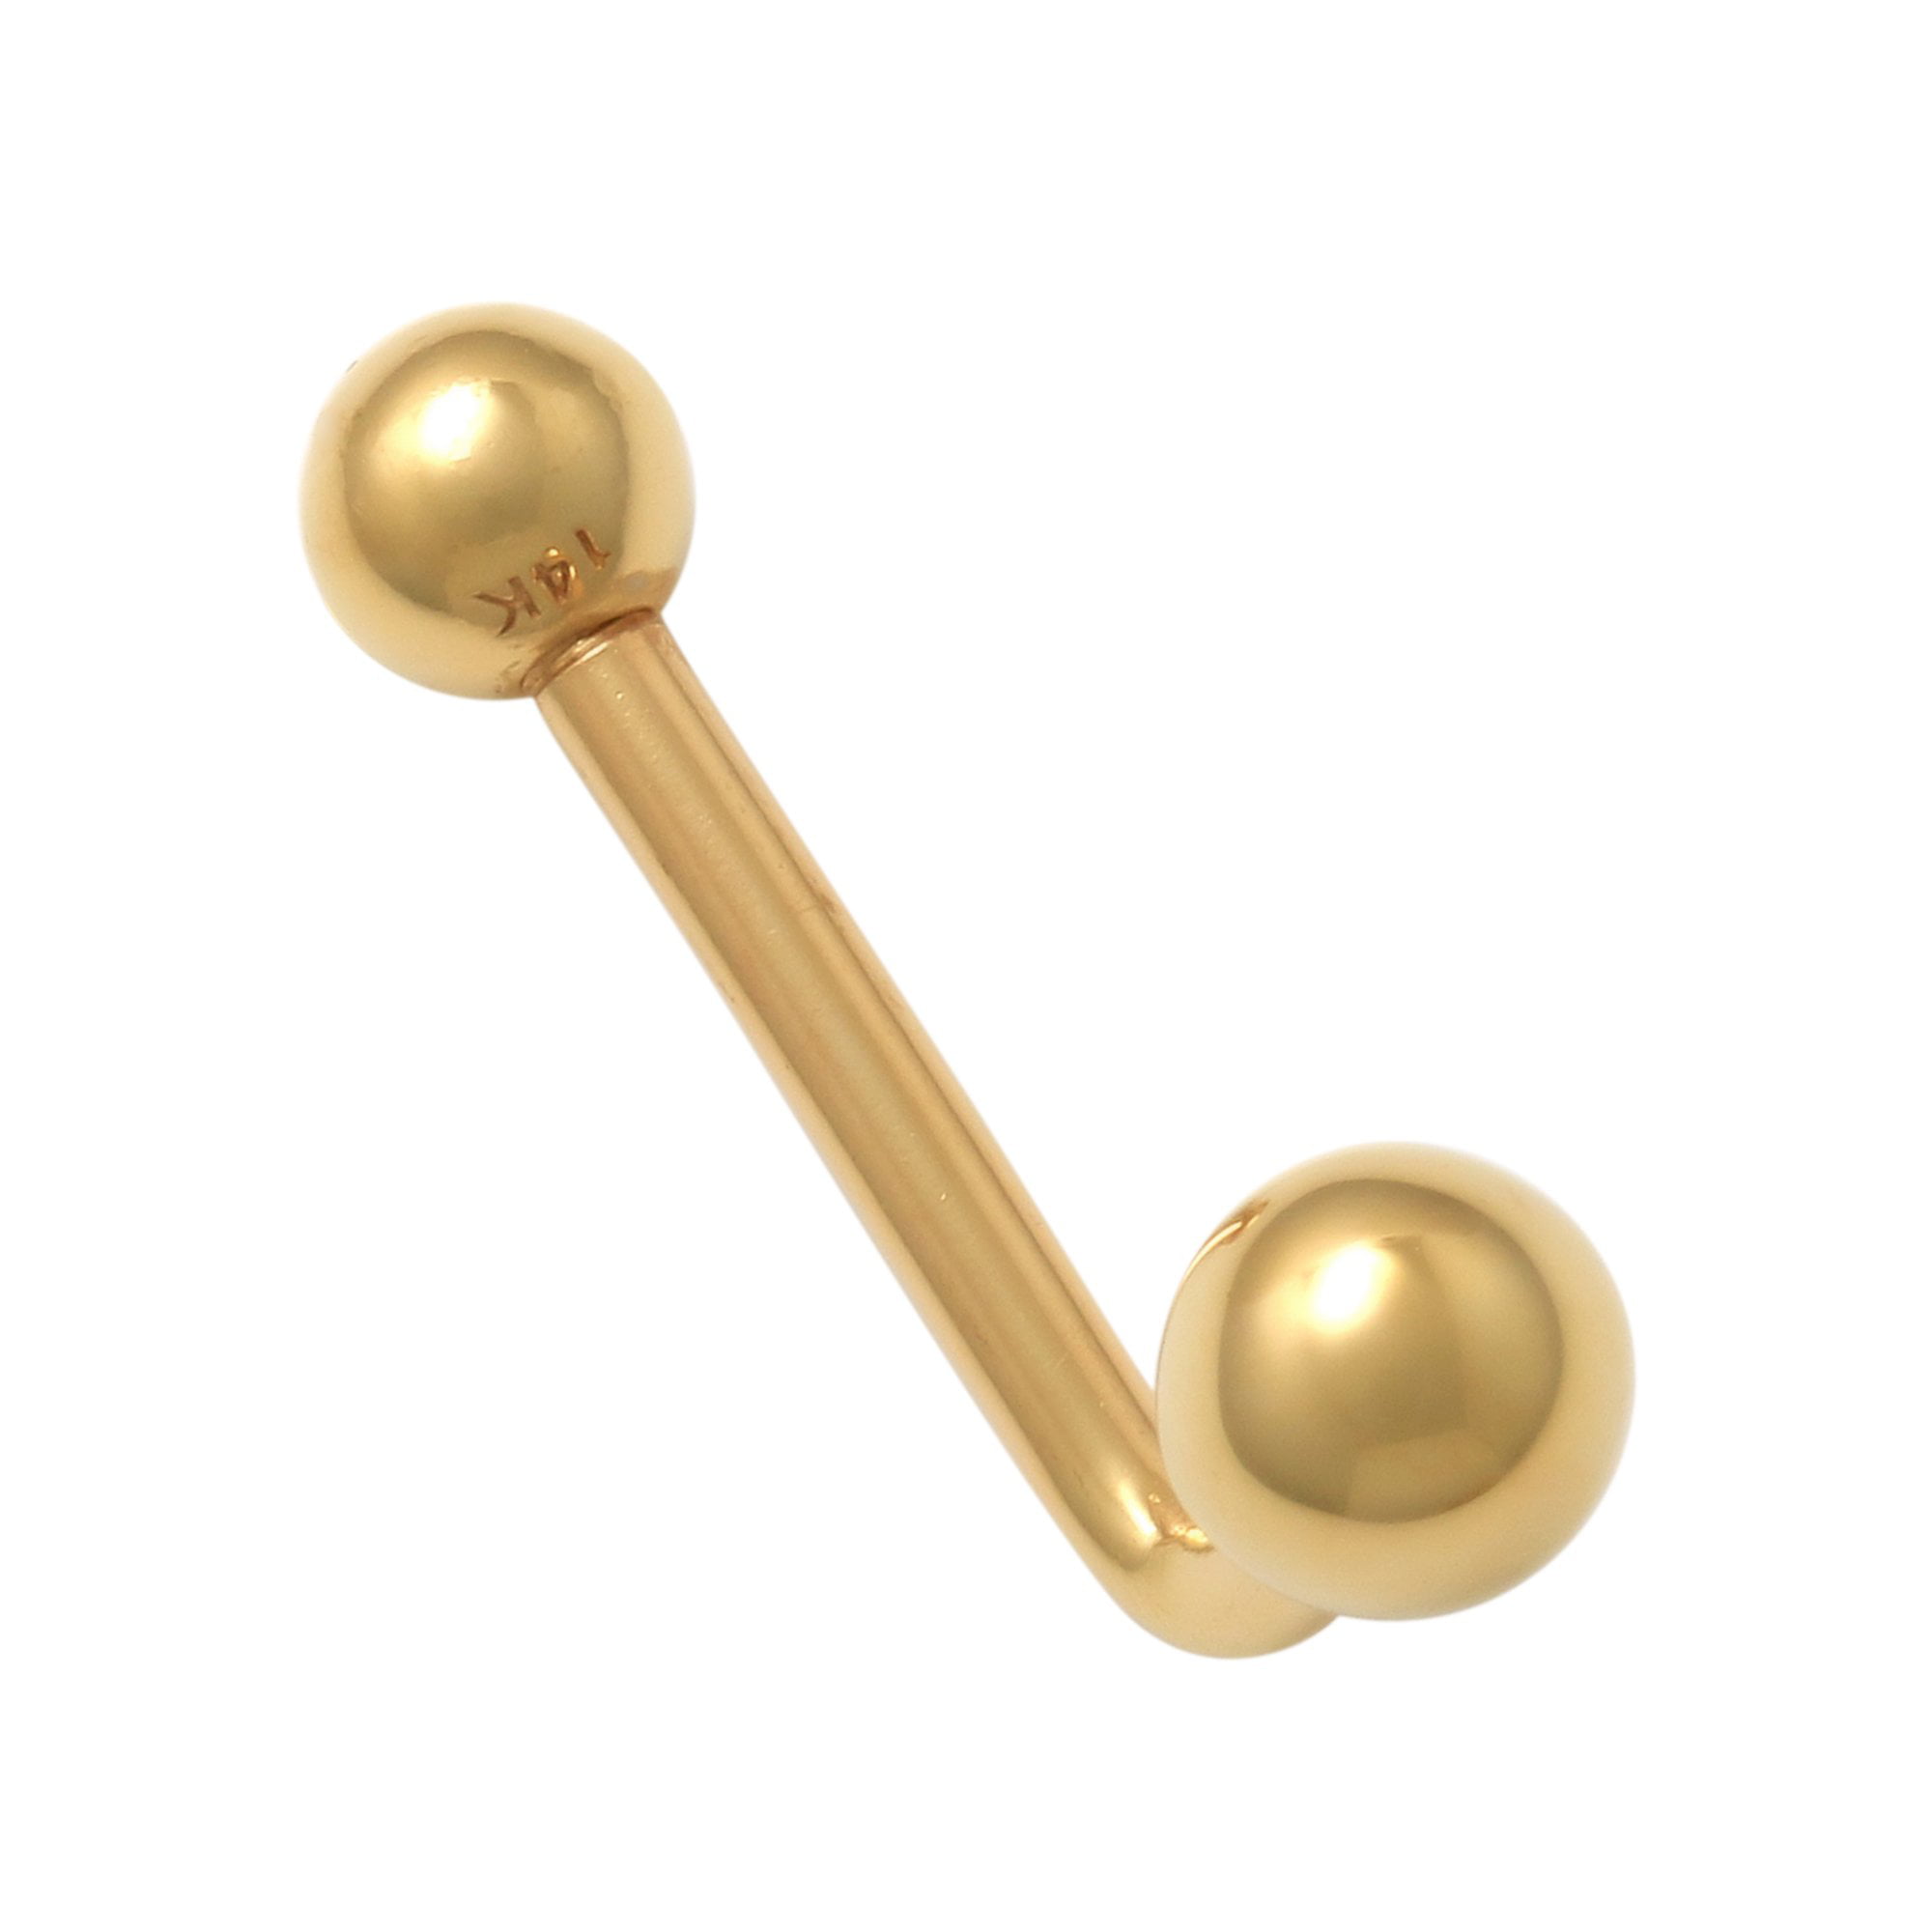 Anygolds 14K REAL Solid Gold 5mm Plain Ball L Shaped Barbell VCH ...